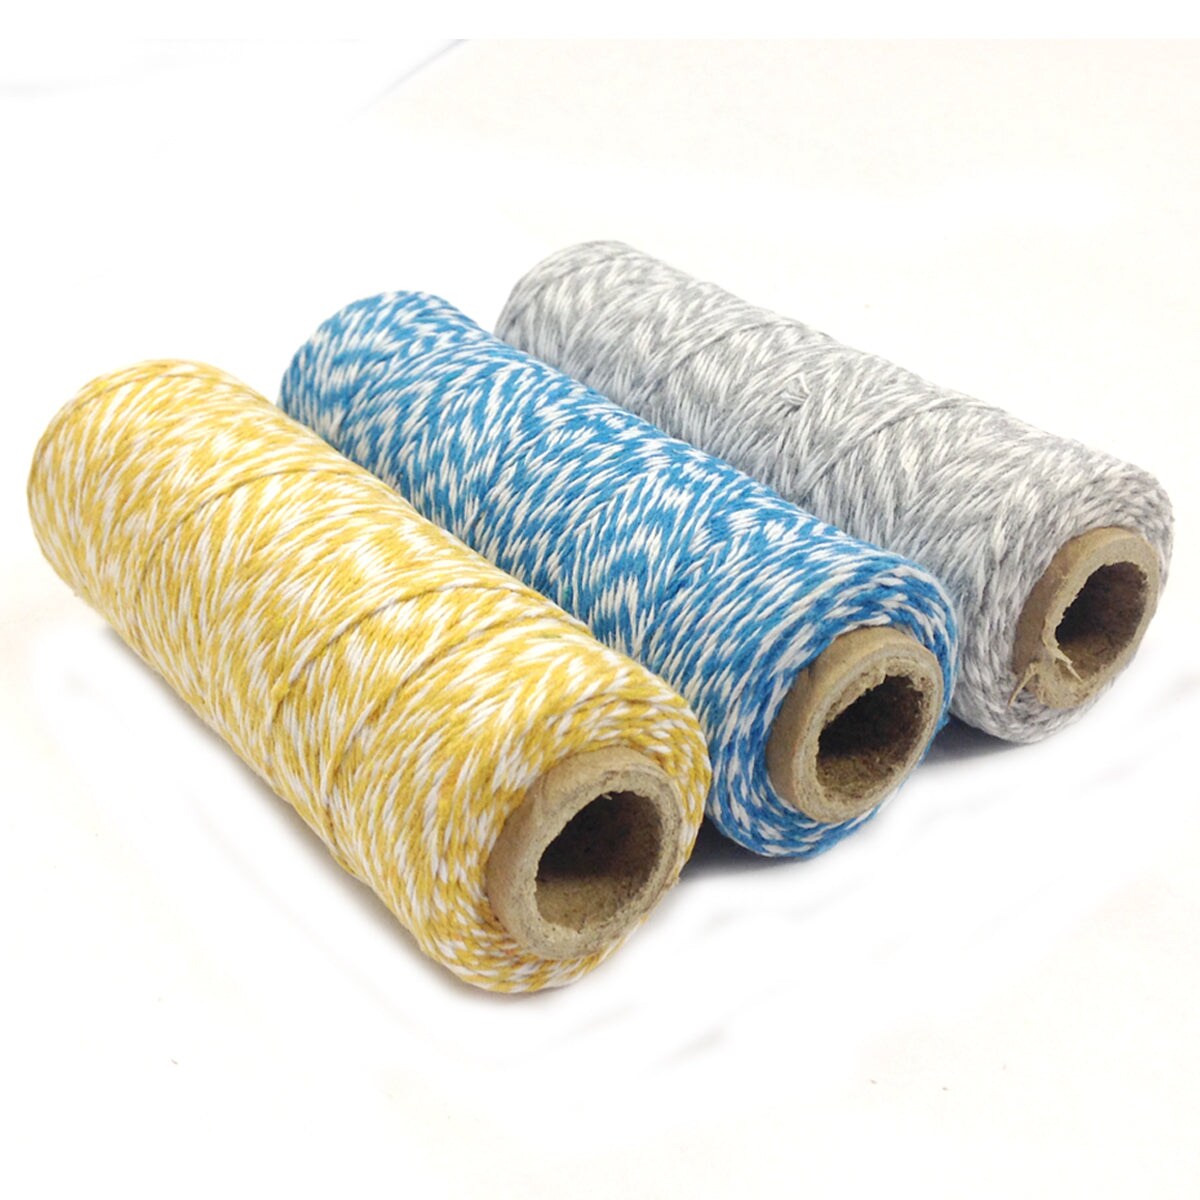 Wrapables Cotton Baker&#x27;s Twine 4ply 330 Yards (Set of 3 Spools x 110 Yards) for Gift Wrapping, Party Decor, and Arts and Craft (Grey, Blue, Dark Yellow)